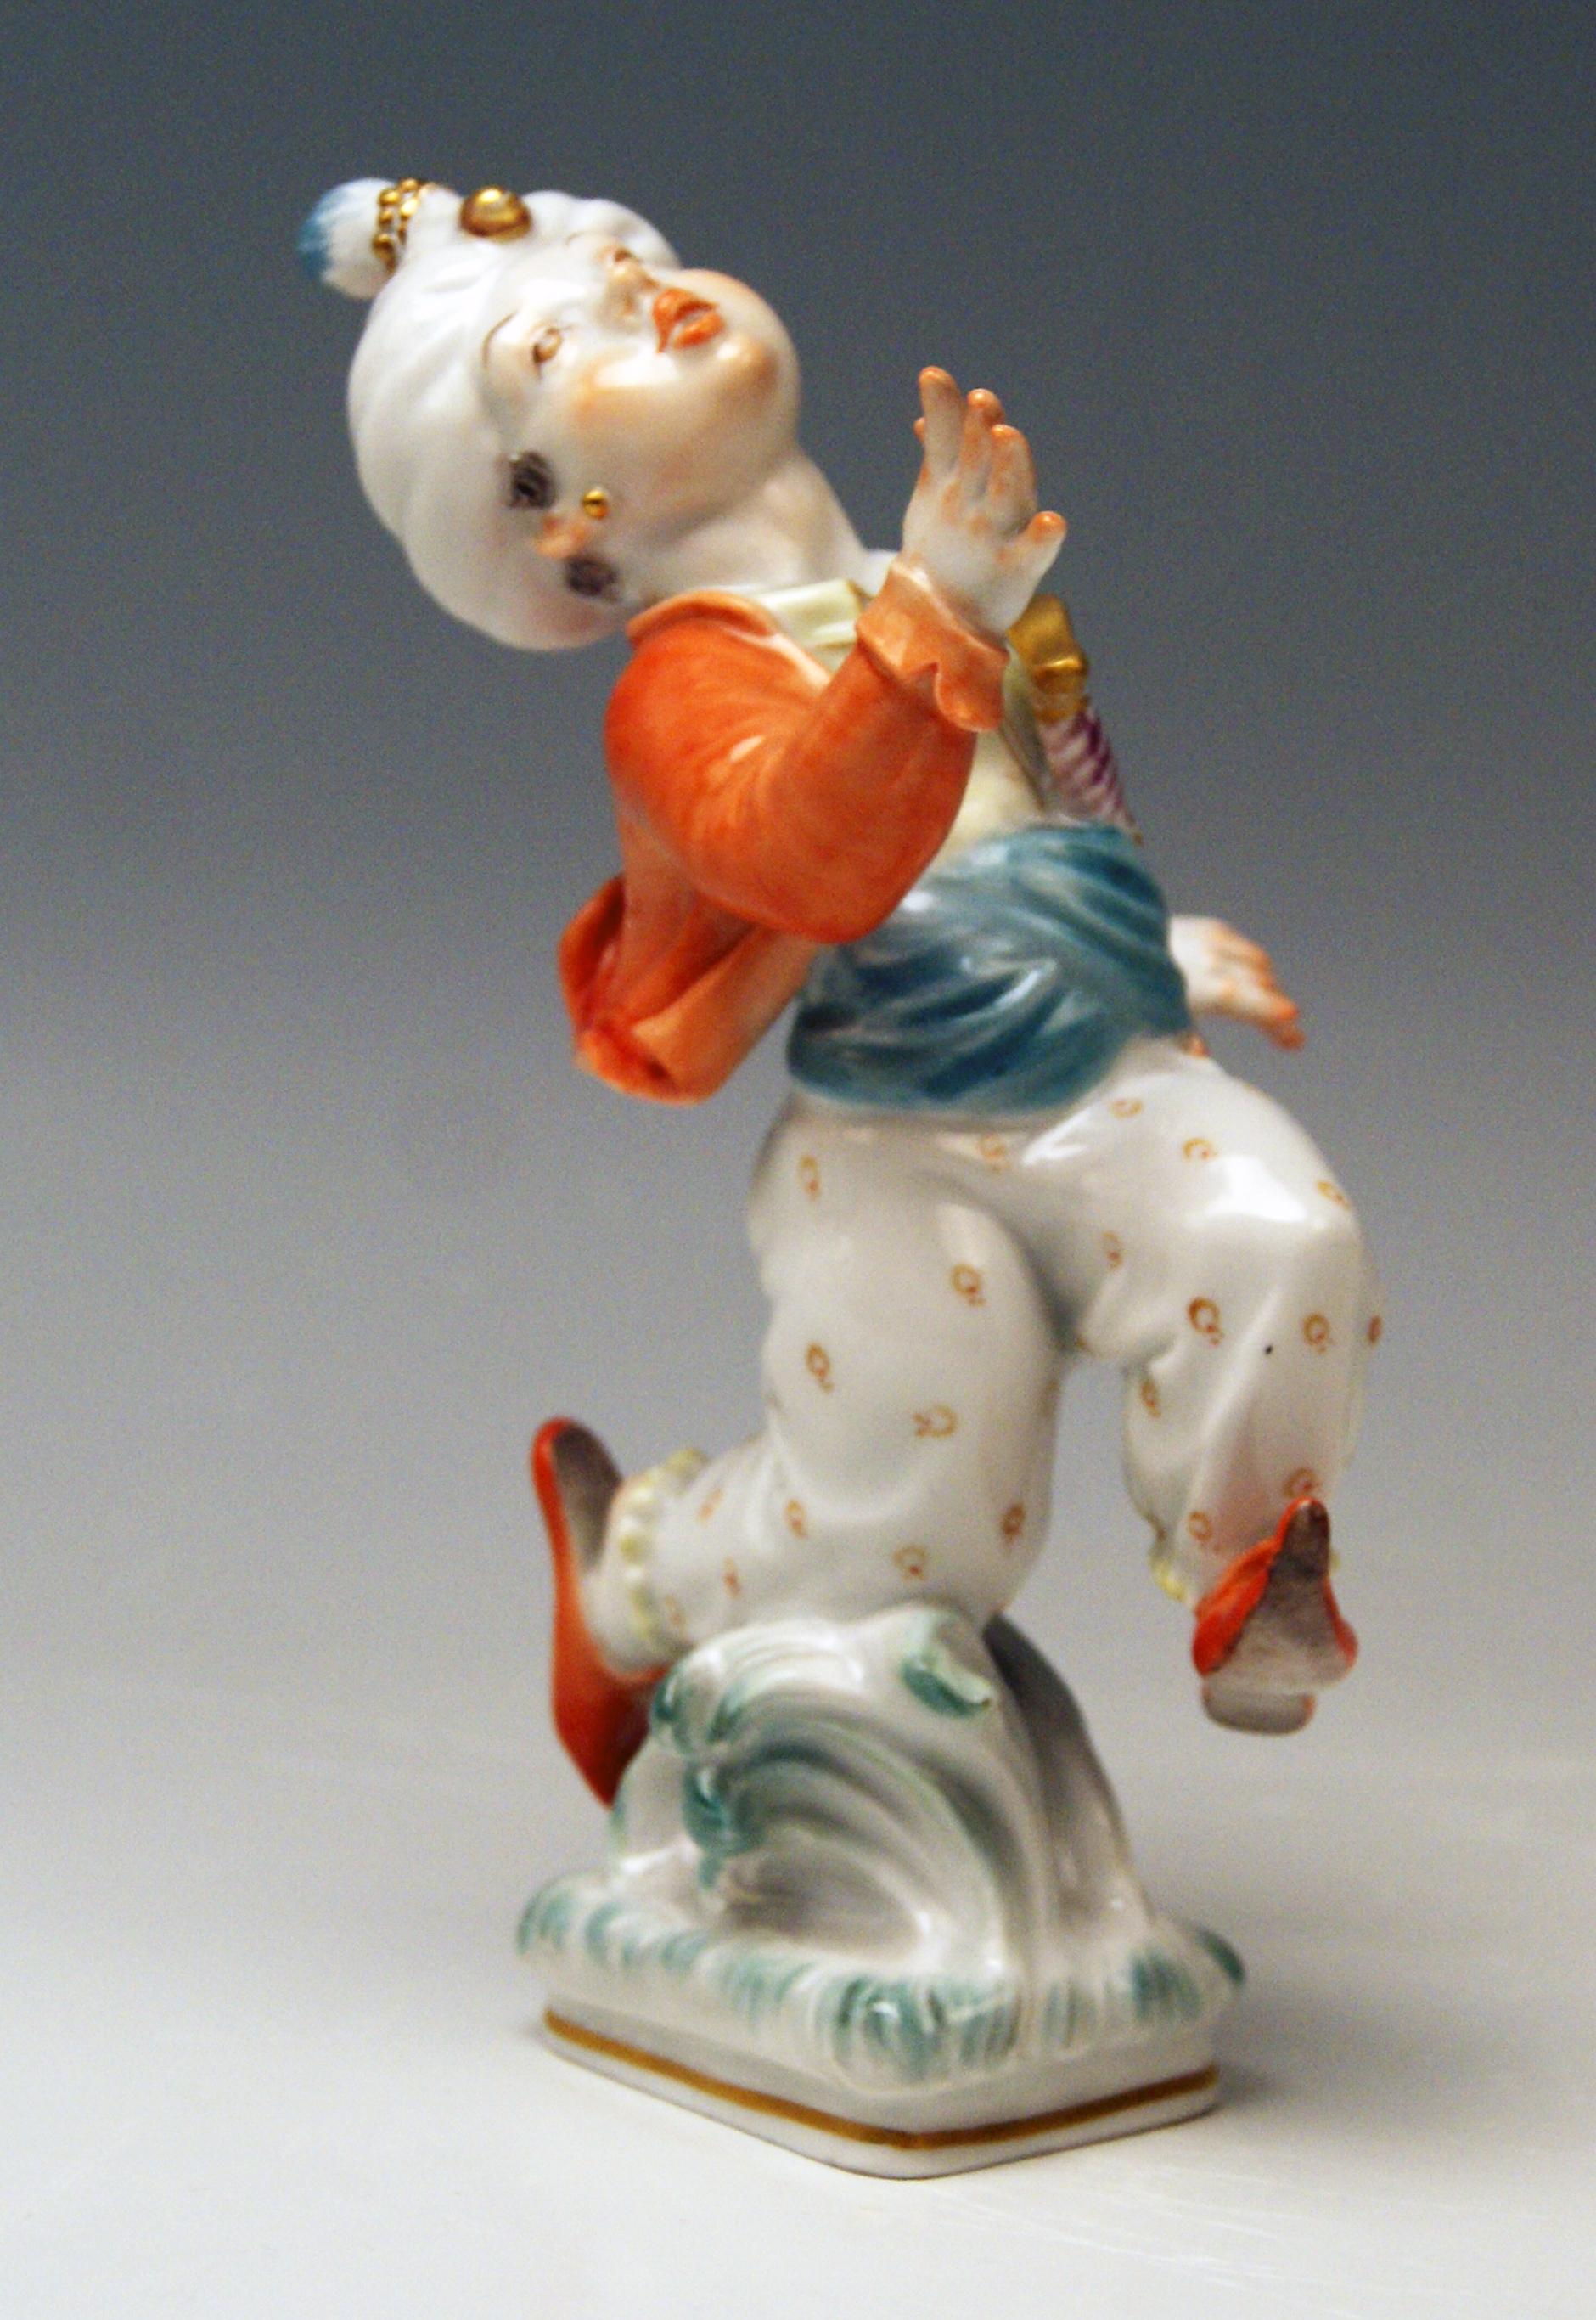 Meissen rare figurine: The Little Muck
The details are stunningly sculptured = finest modelling!

Design:
Helmut Schulz (1906 - 1984) / model S 223 created 1955
Schulz was modeller, painter and draughtsman. He was active at Meissen Porcelain